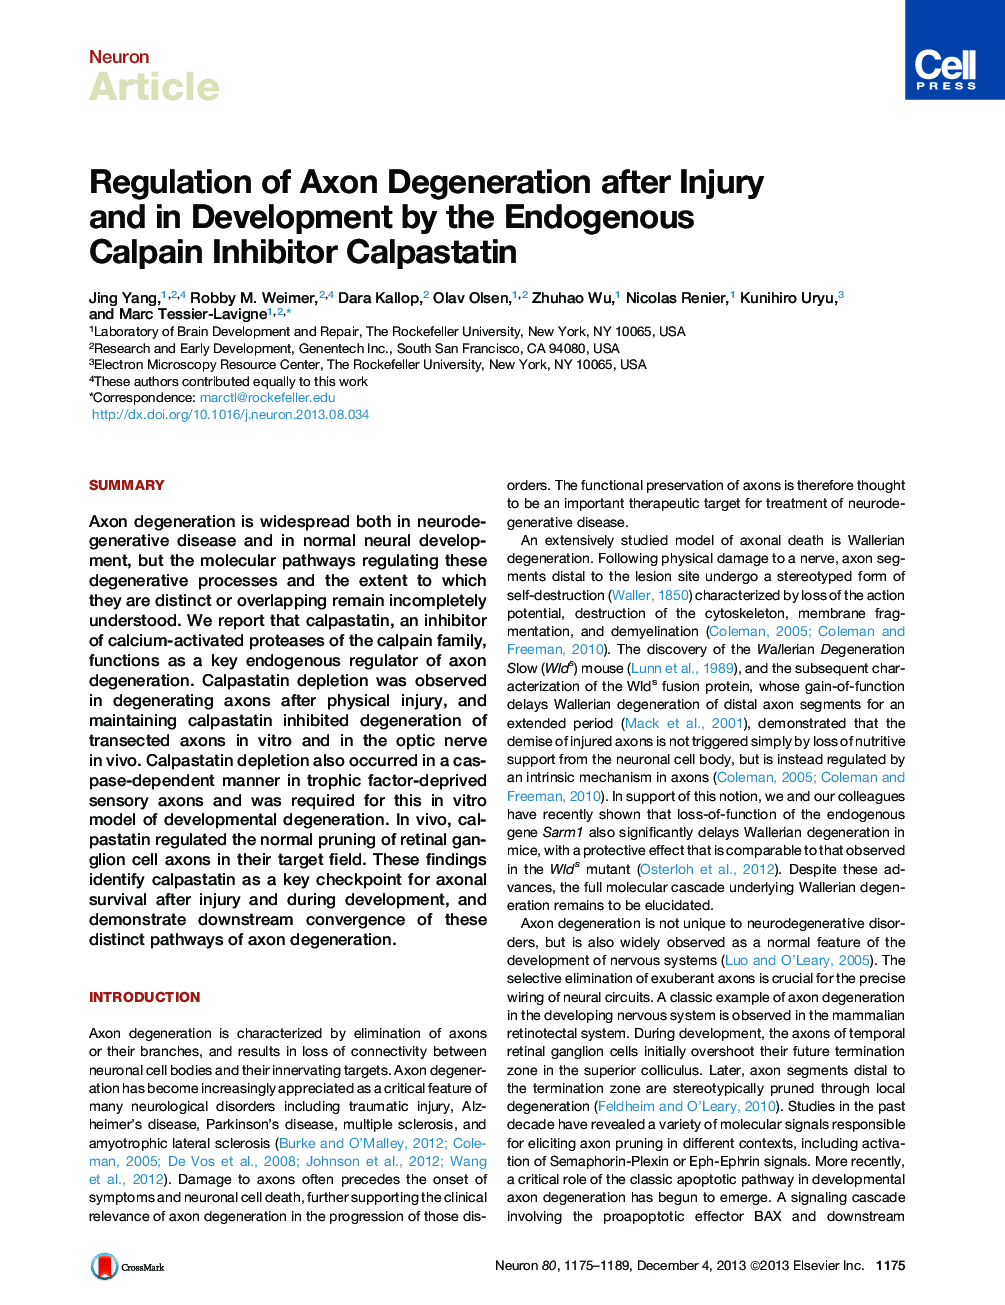 Regulation of Axon Degeneration after Injury and in Development by the Endogenous Calpain Inhibitor Calpastatin